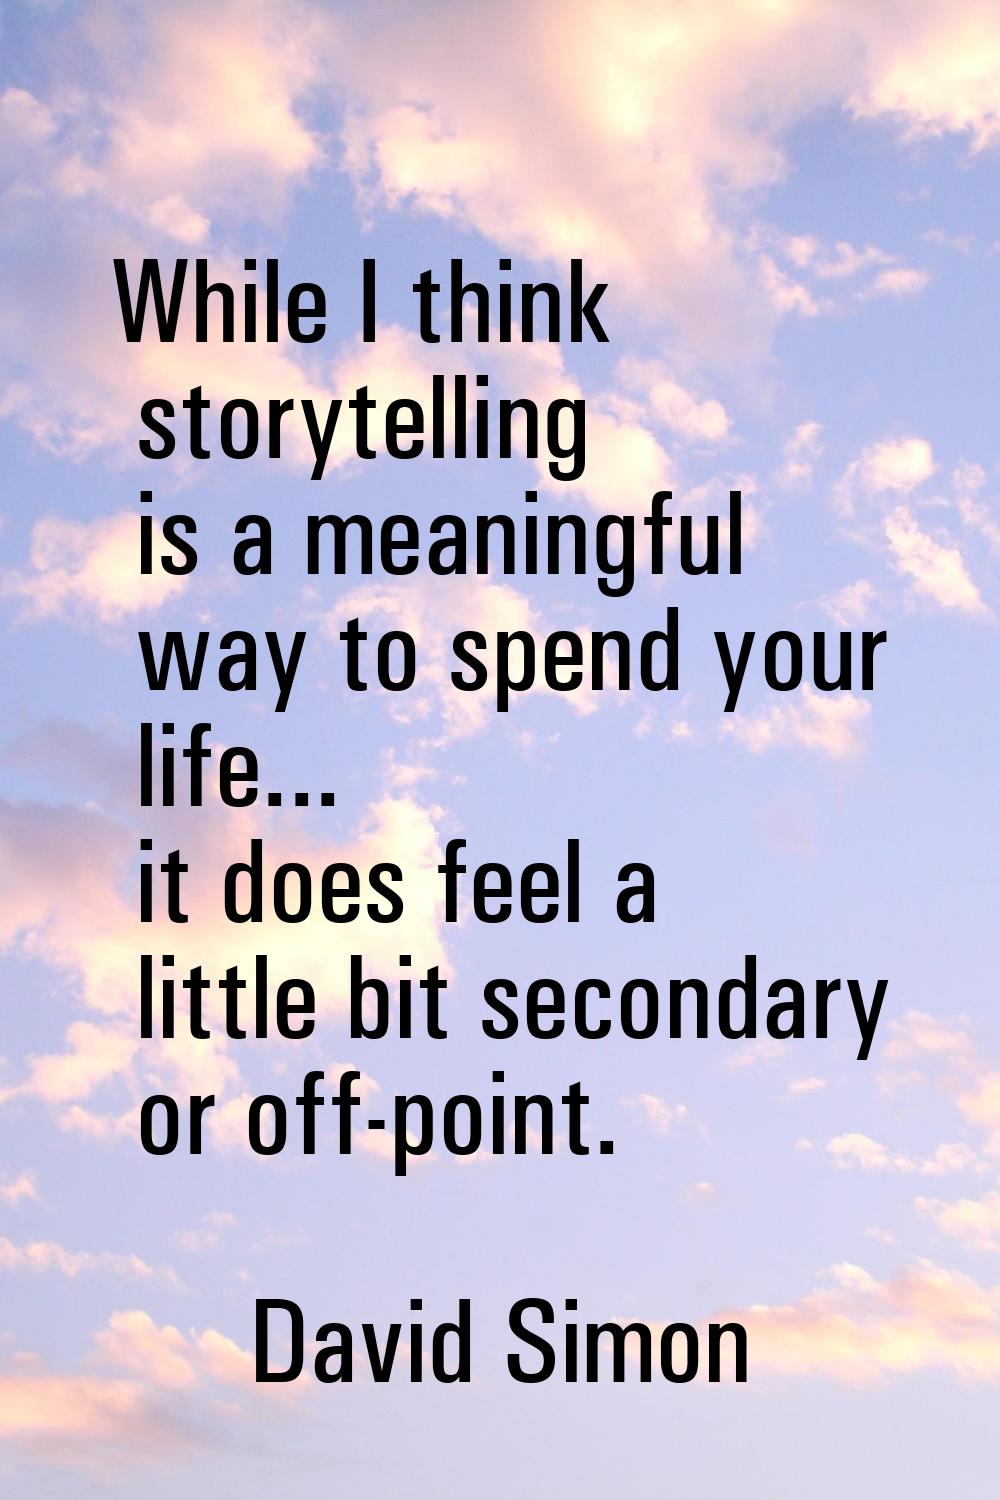 While I think storytelling is a meaningful way to spend your life... it does feel a little bit seco